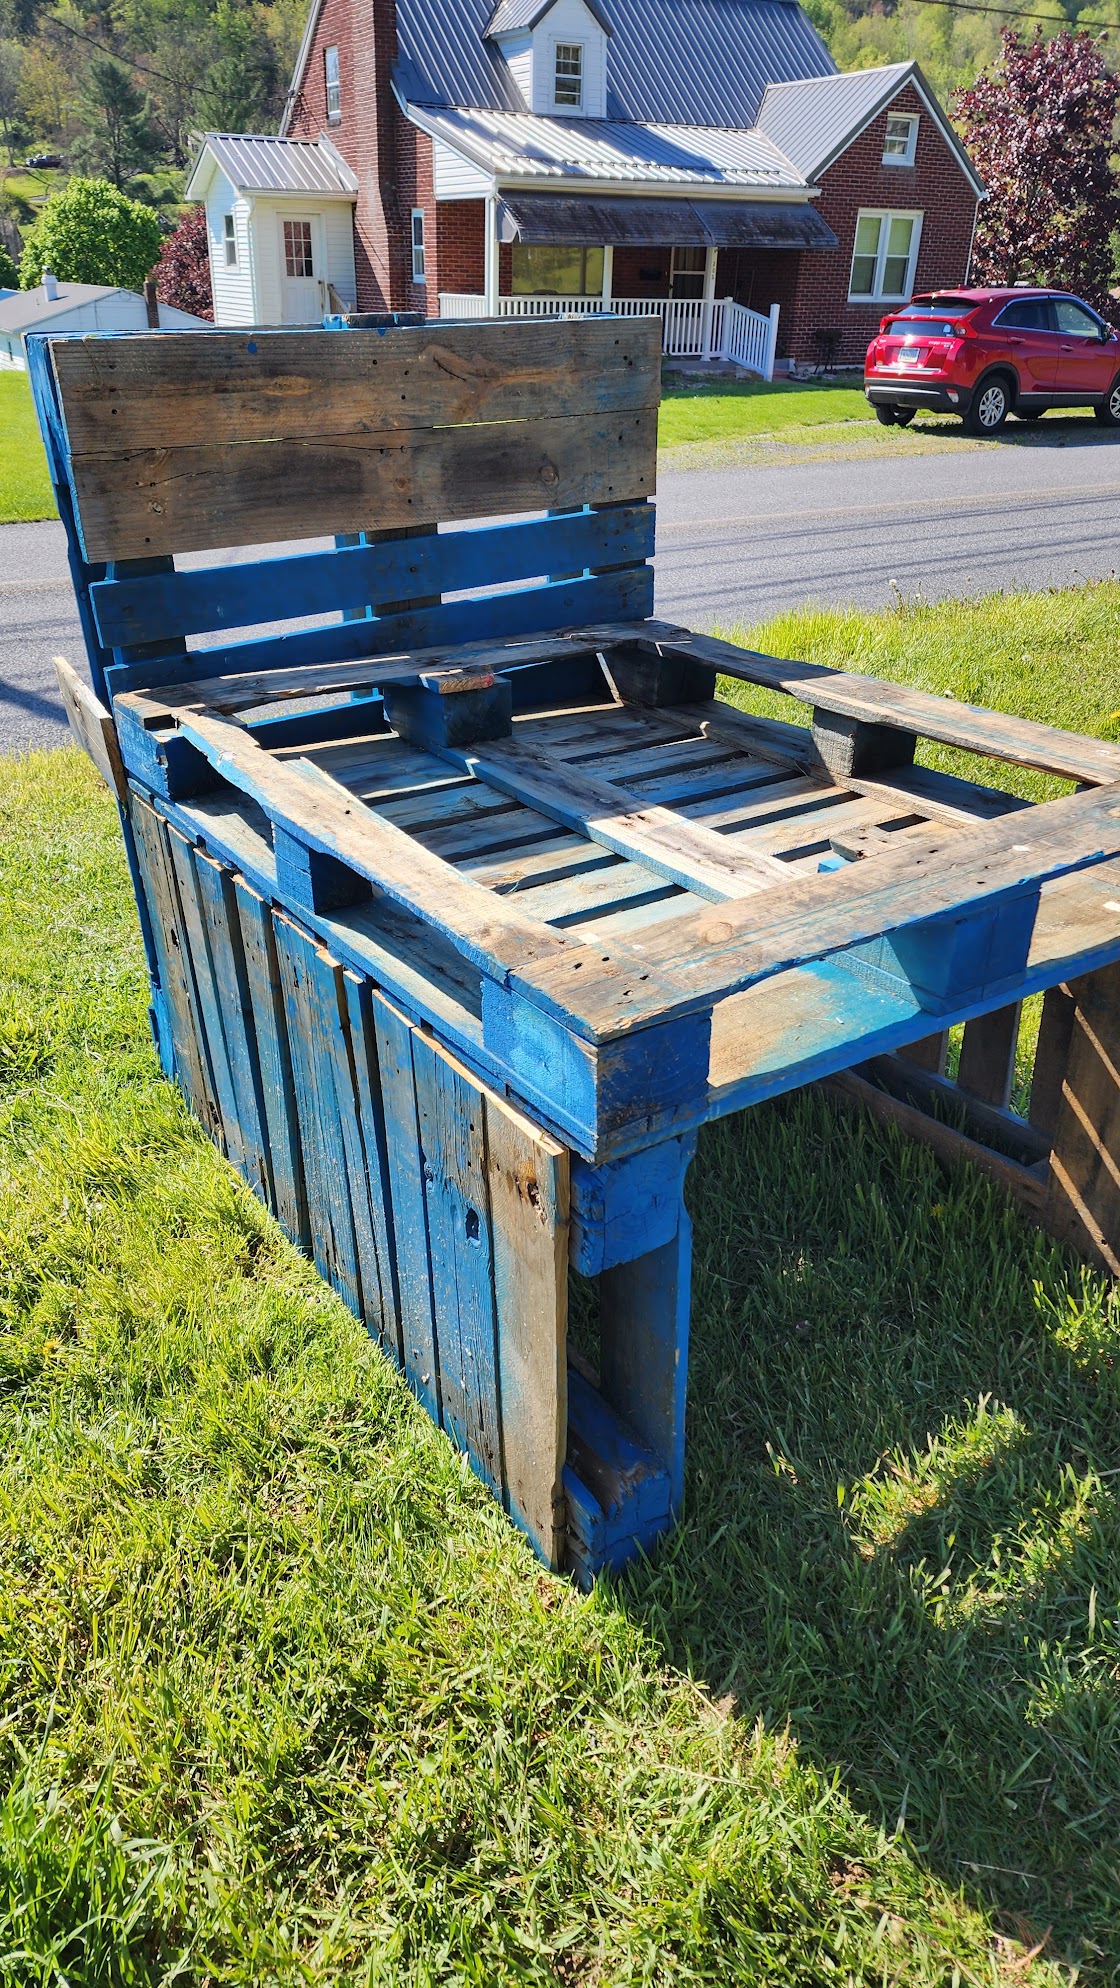 Upside down pallet stacked on top of legs. Bottom middle section is removed.